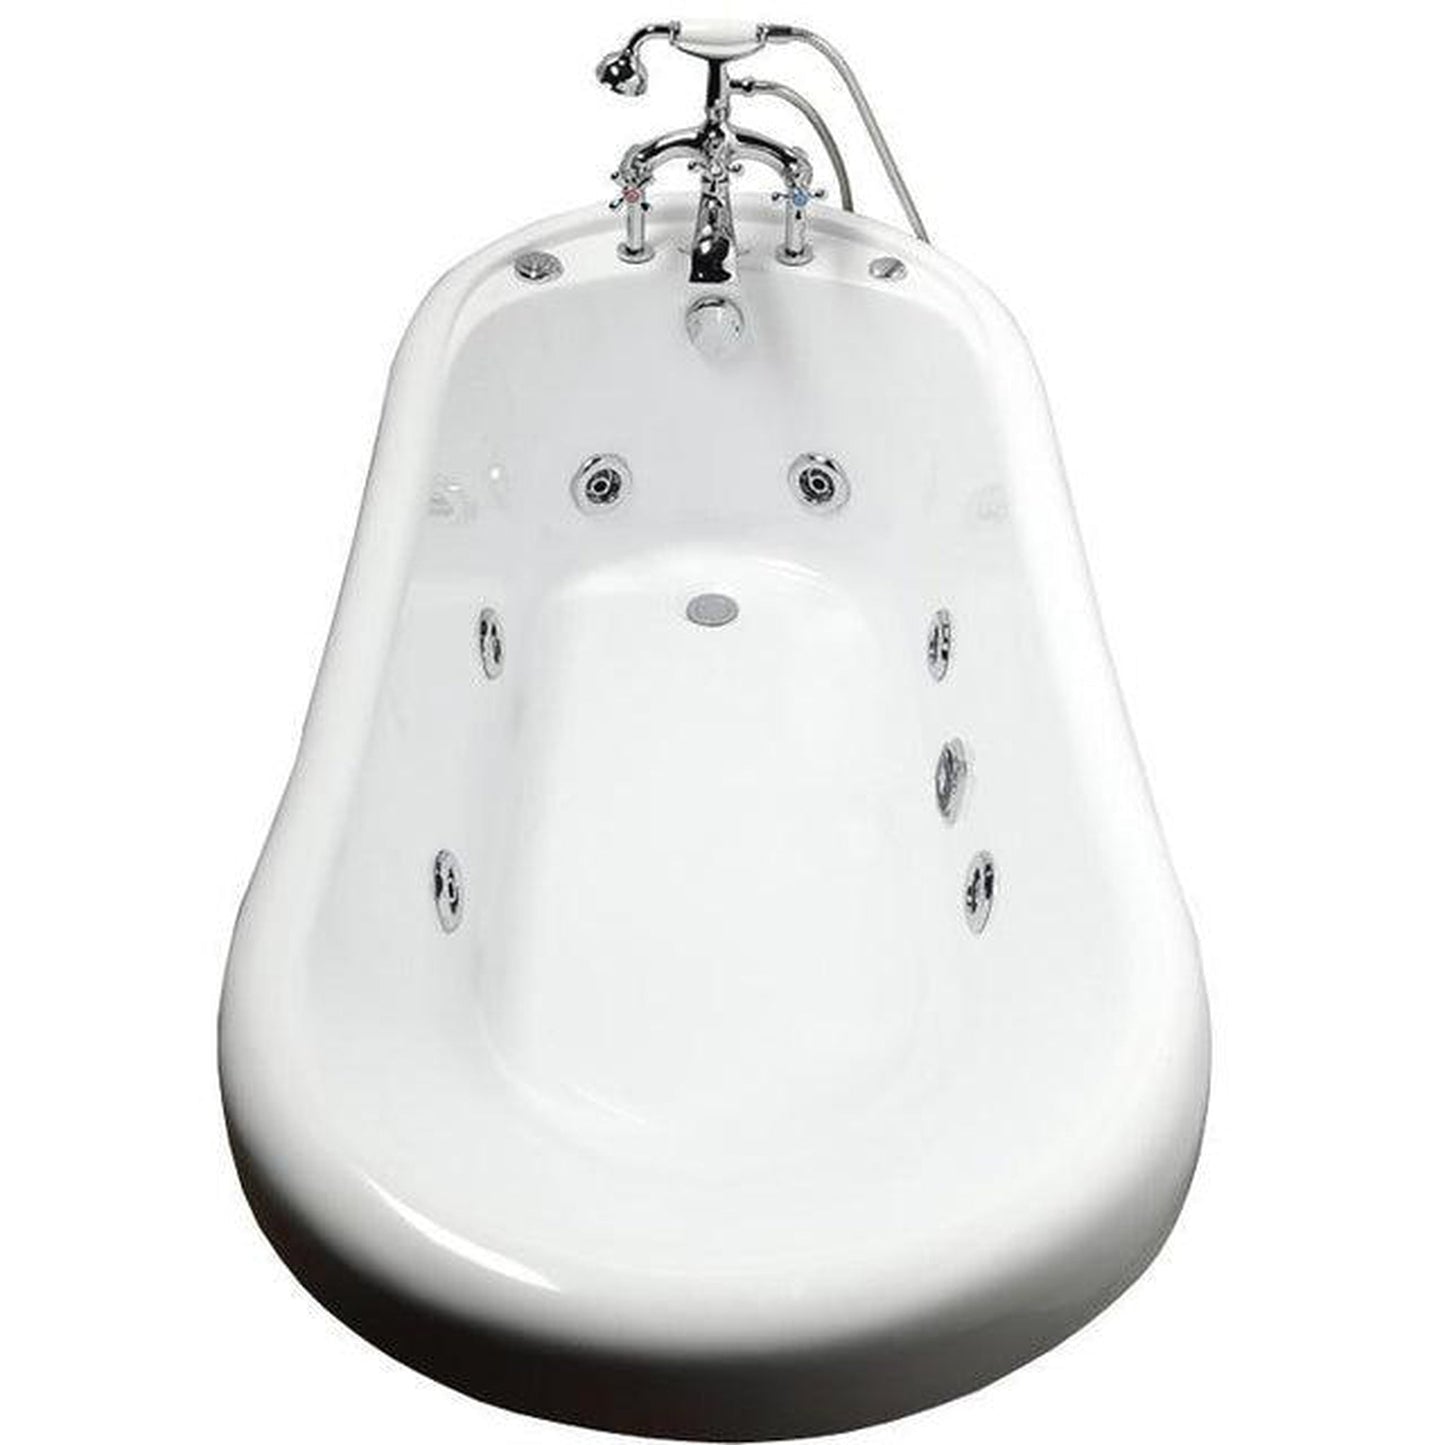 Mesa Malibu 67" x 32" x 31" One Person Freestanding Whirlpool Clawfoot Tub With 6 Massage Jets and Antique Chrome Faucet